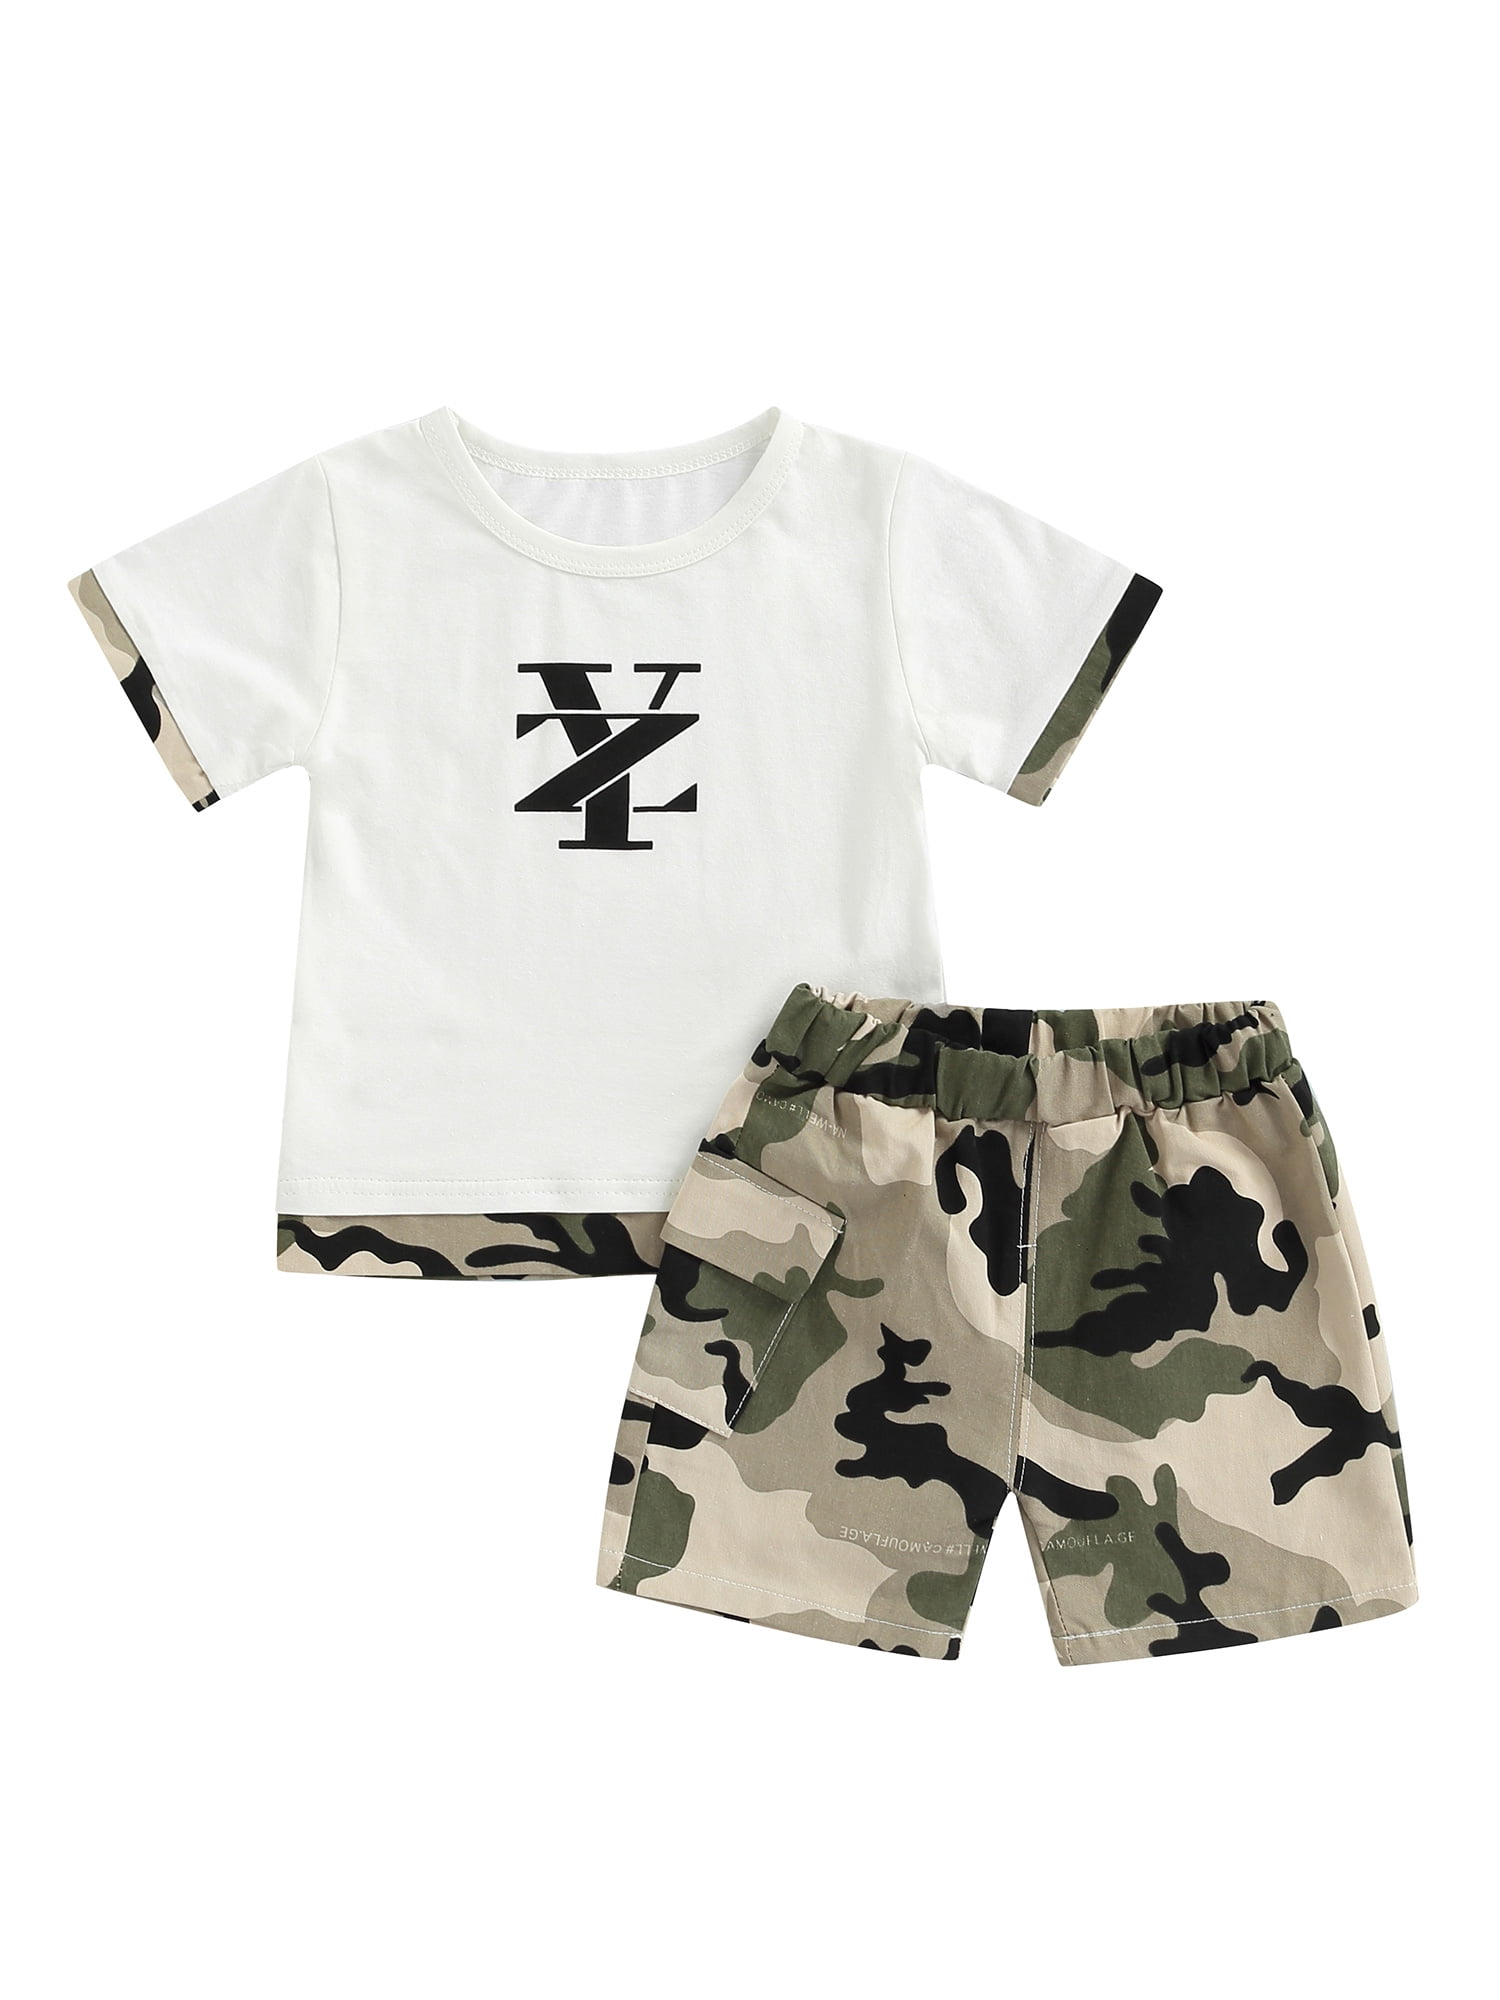 Mialoley Toddler Kids Boys 2 Pieces Outfit, Letter Print Round Neck Short  Sleeve T-Shirt + Camouflage Shorts Summer Set 